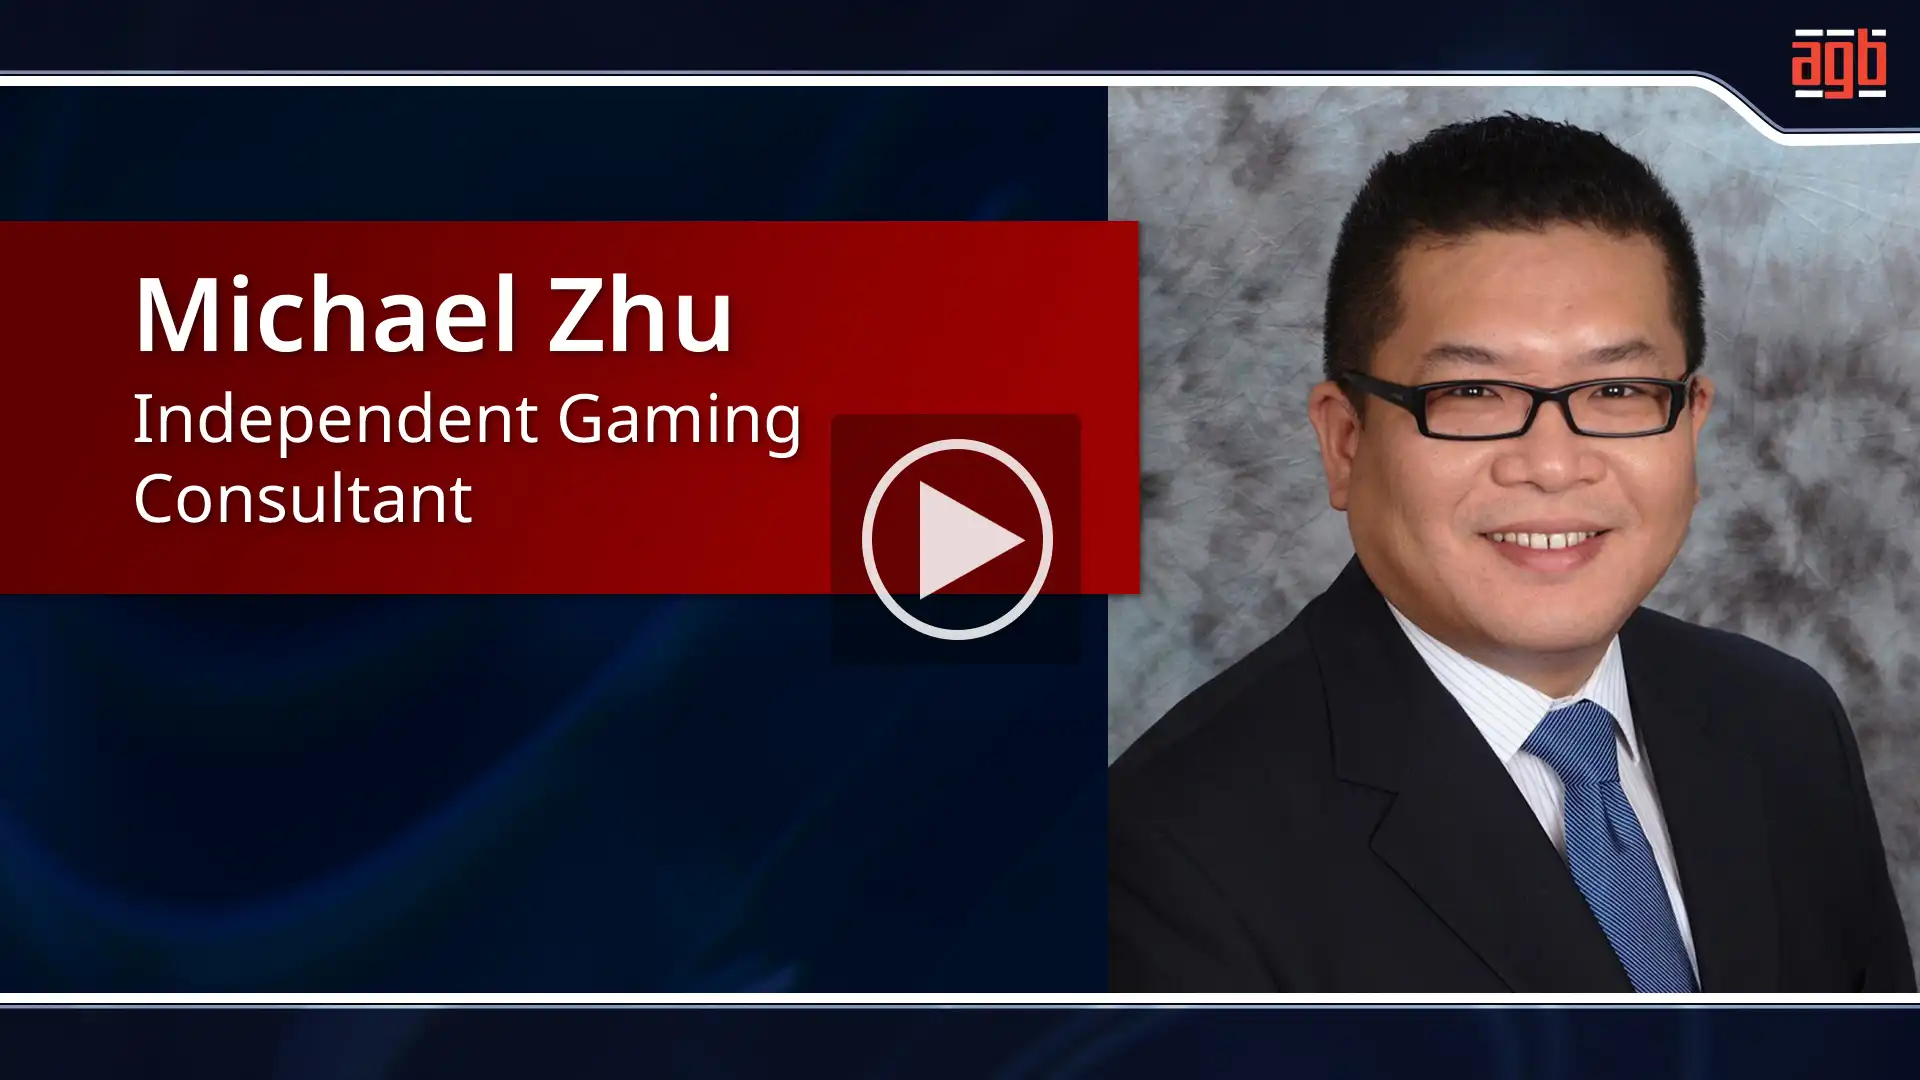 State of play of Asian gaming with Michael Zhu